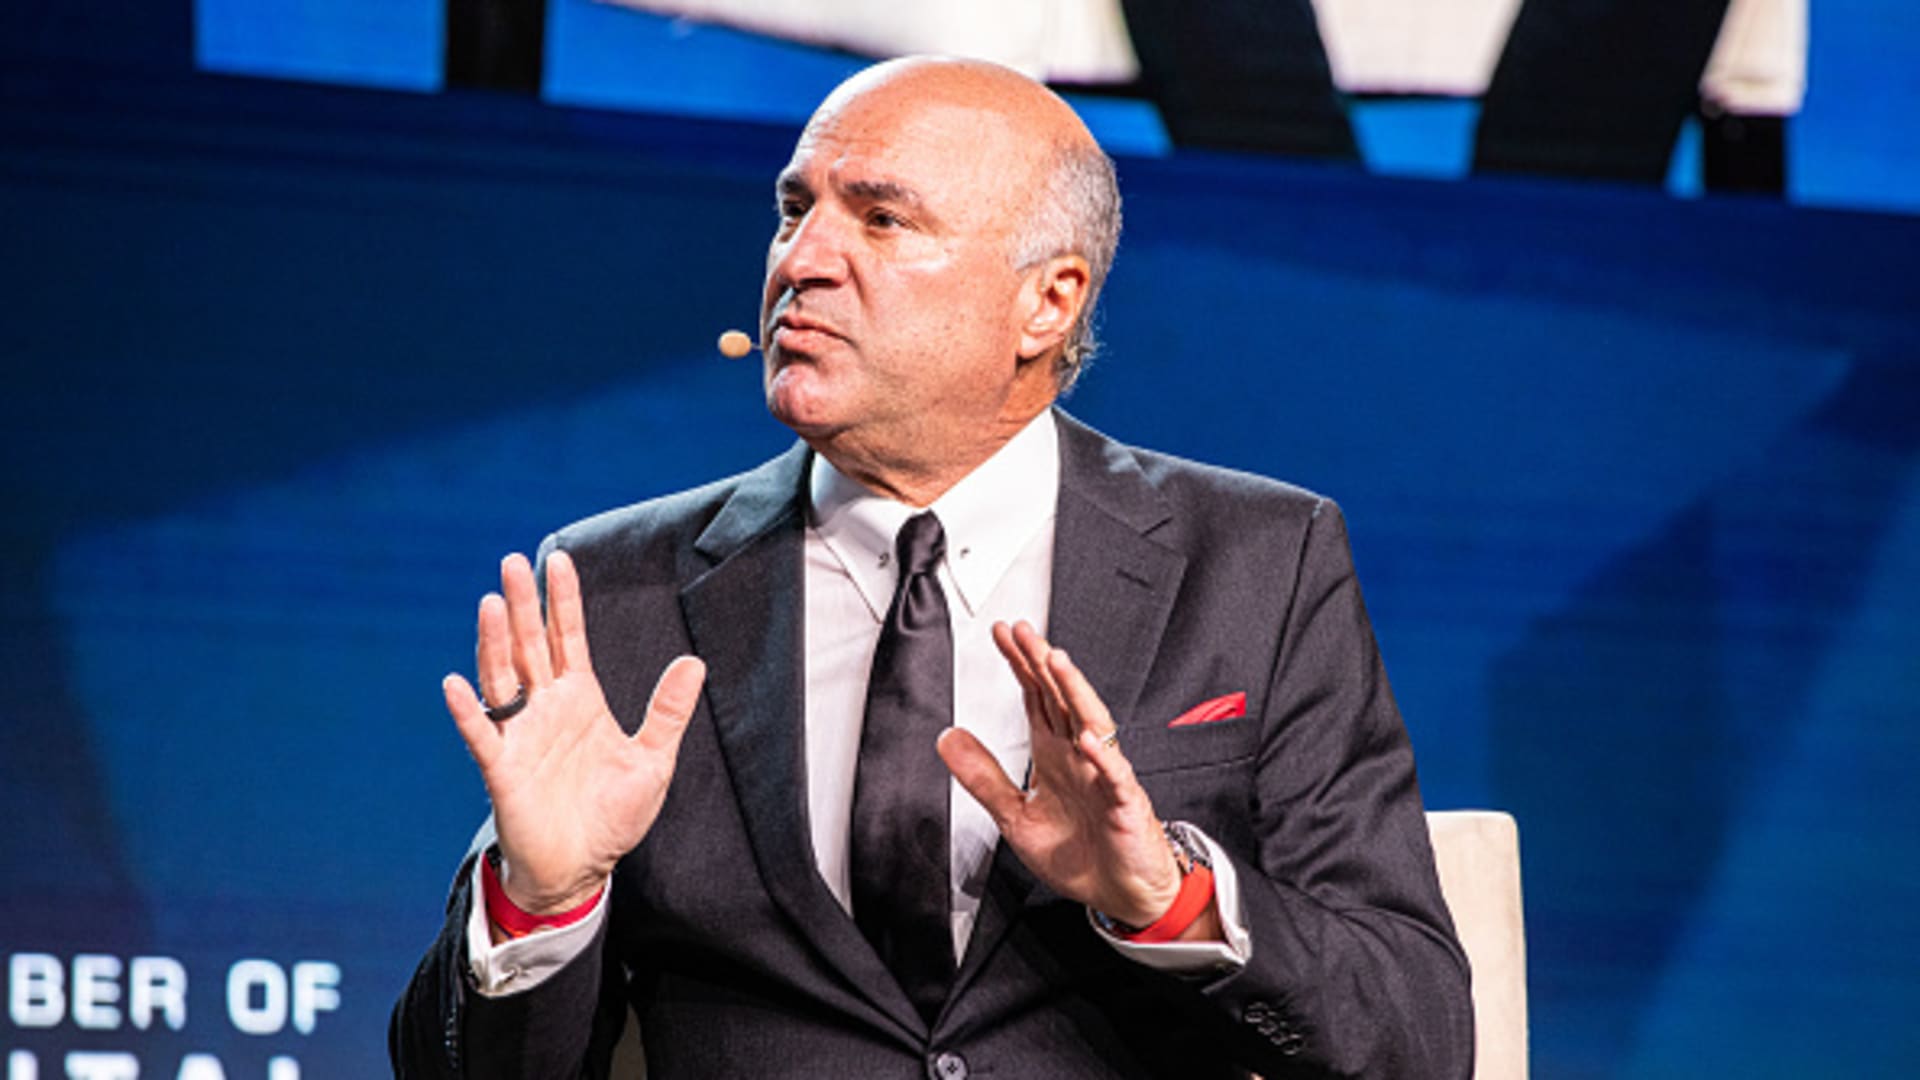 Kevin O’Leary says there is not any proof of a recession at the moment